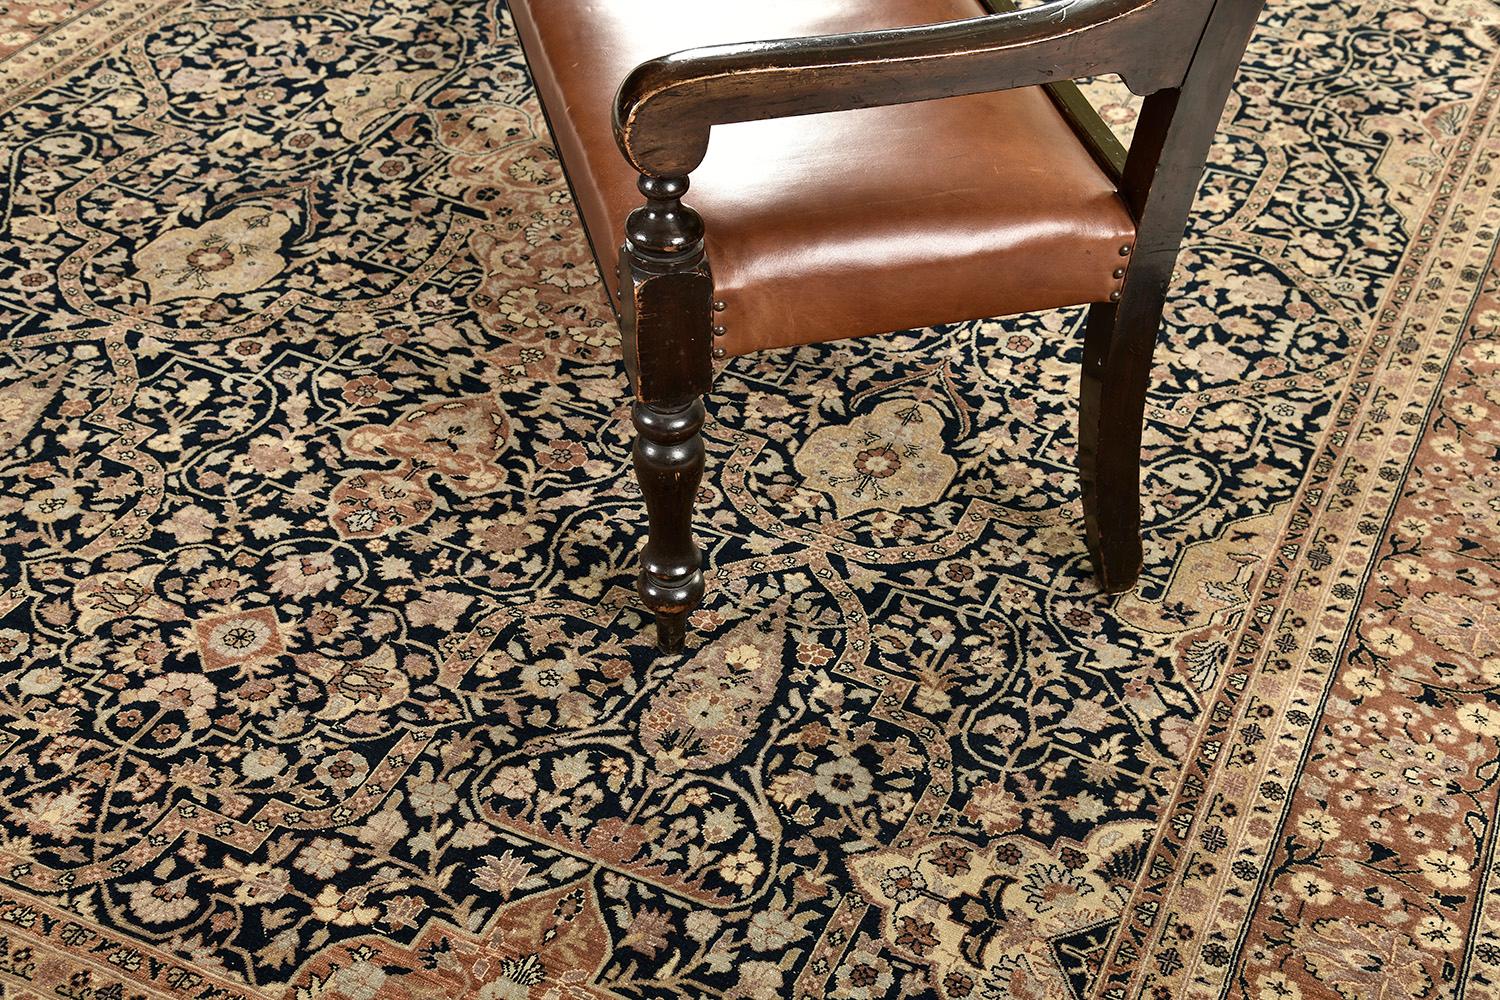 Get stunned by Farahan Rug's revival which the borders harmoniously contribute to the florid motifs. Brilliant neutral tones enhance the beauty of the rug and will match in any space you want. Traditional home-style and mid-century interiors are